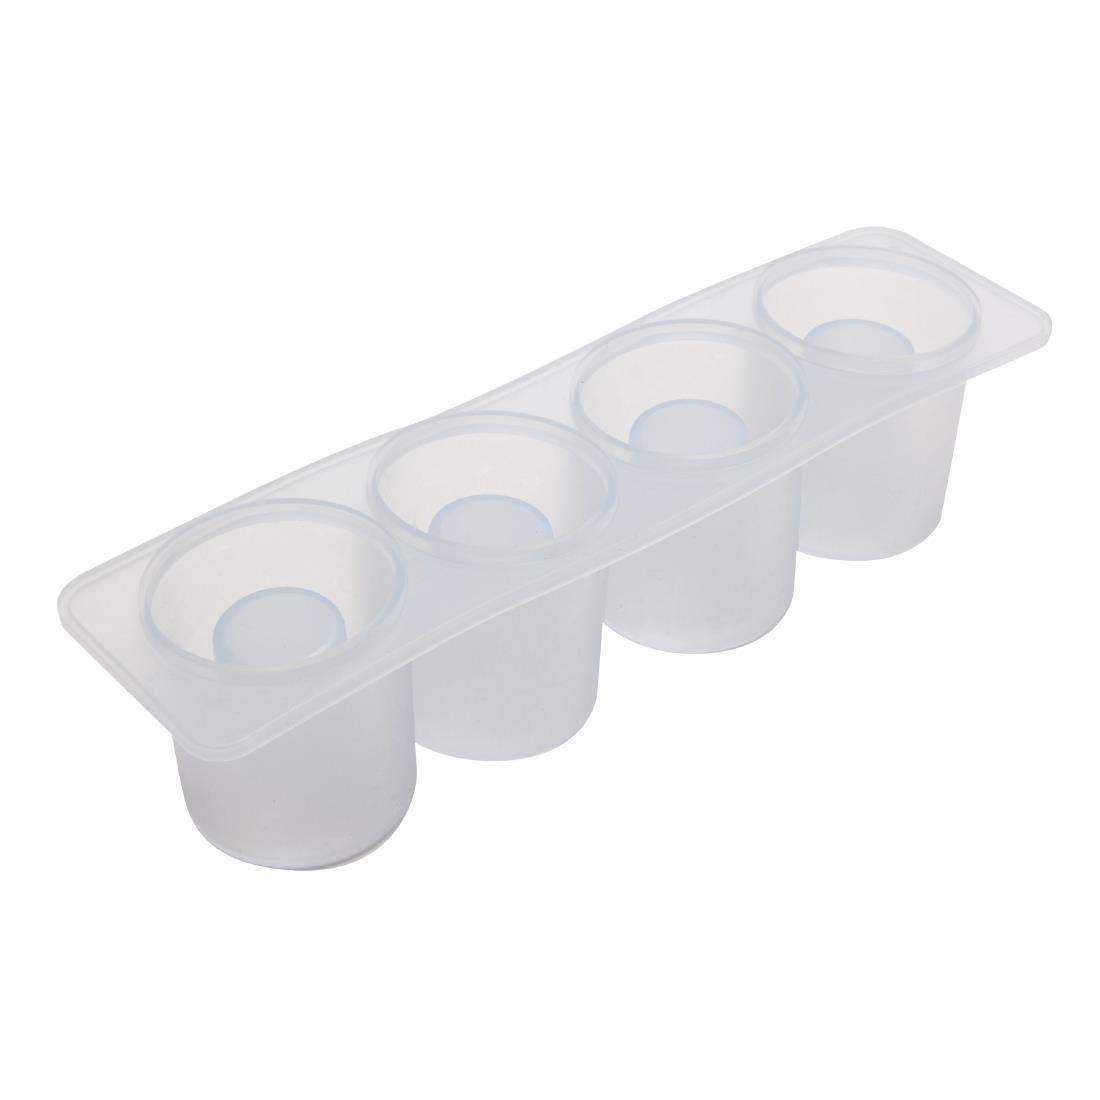 Beaumont Silicone Shot Glass Mould - CN937  - 1